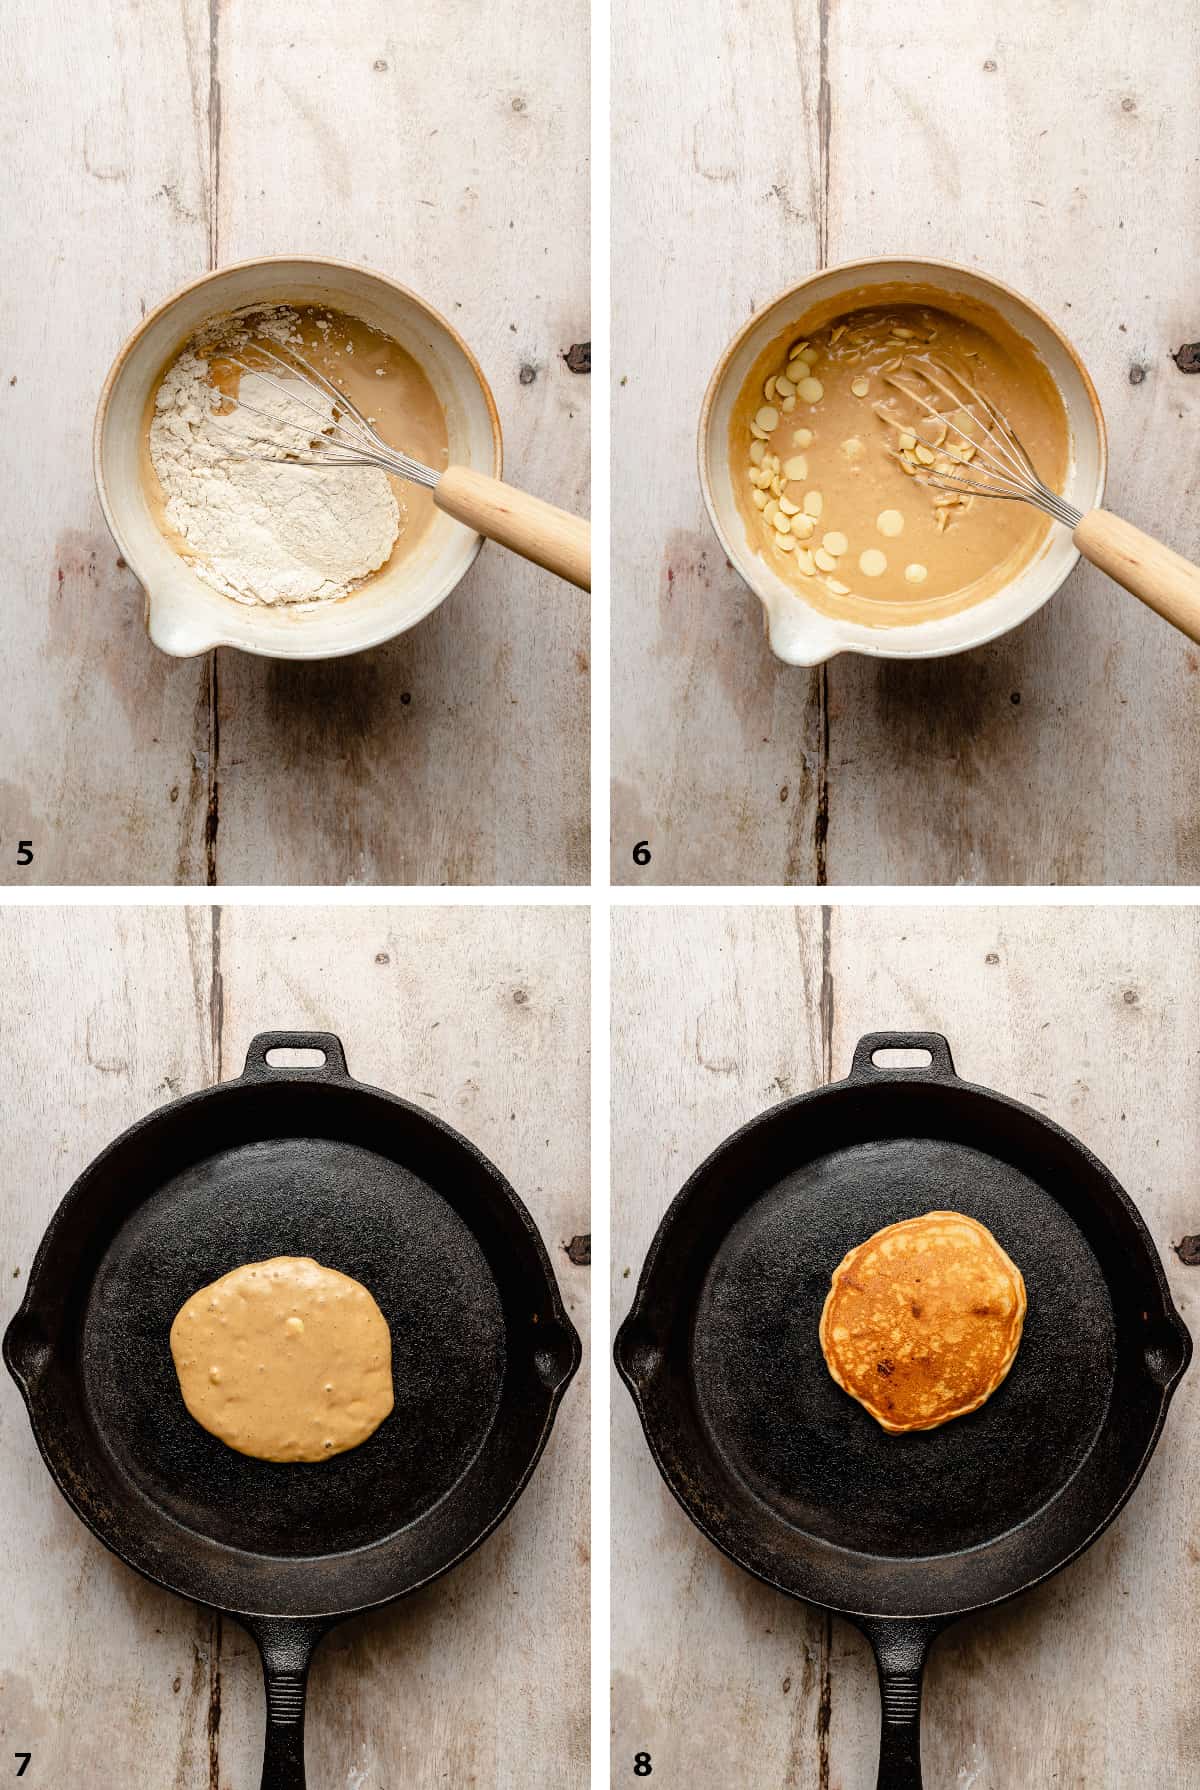 Process of making the pancake batter, stirring through white chocolate chips and pre flipped and flipped in a pan.